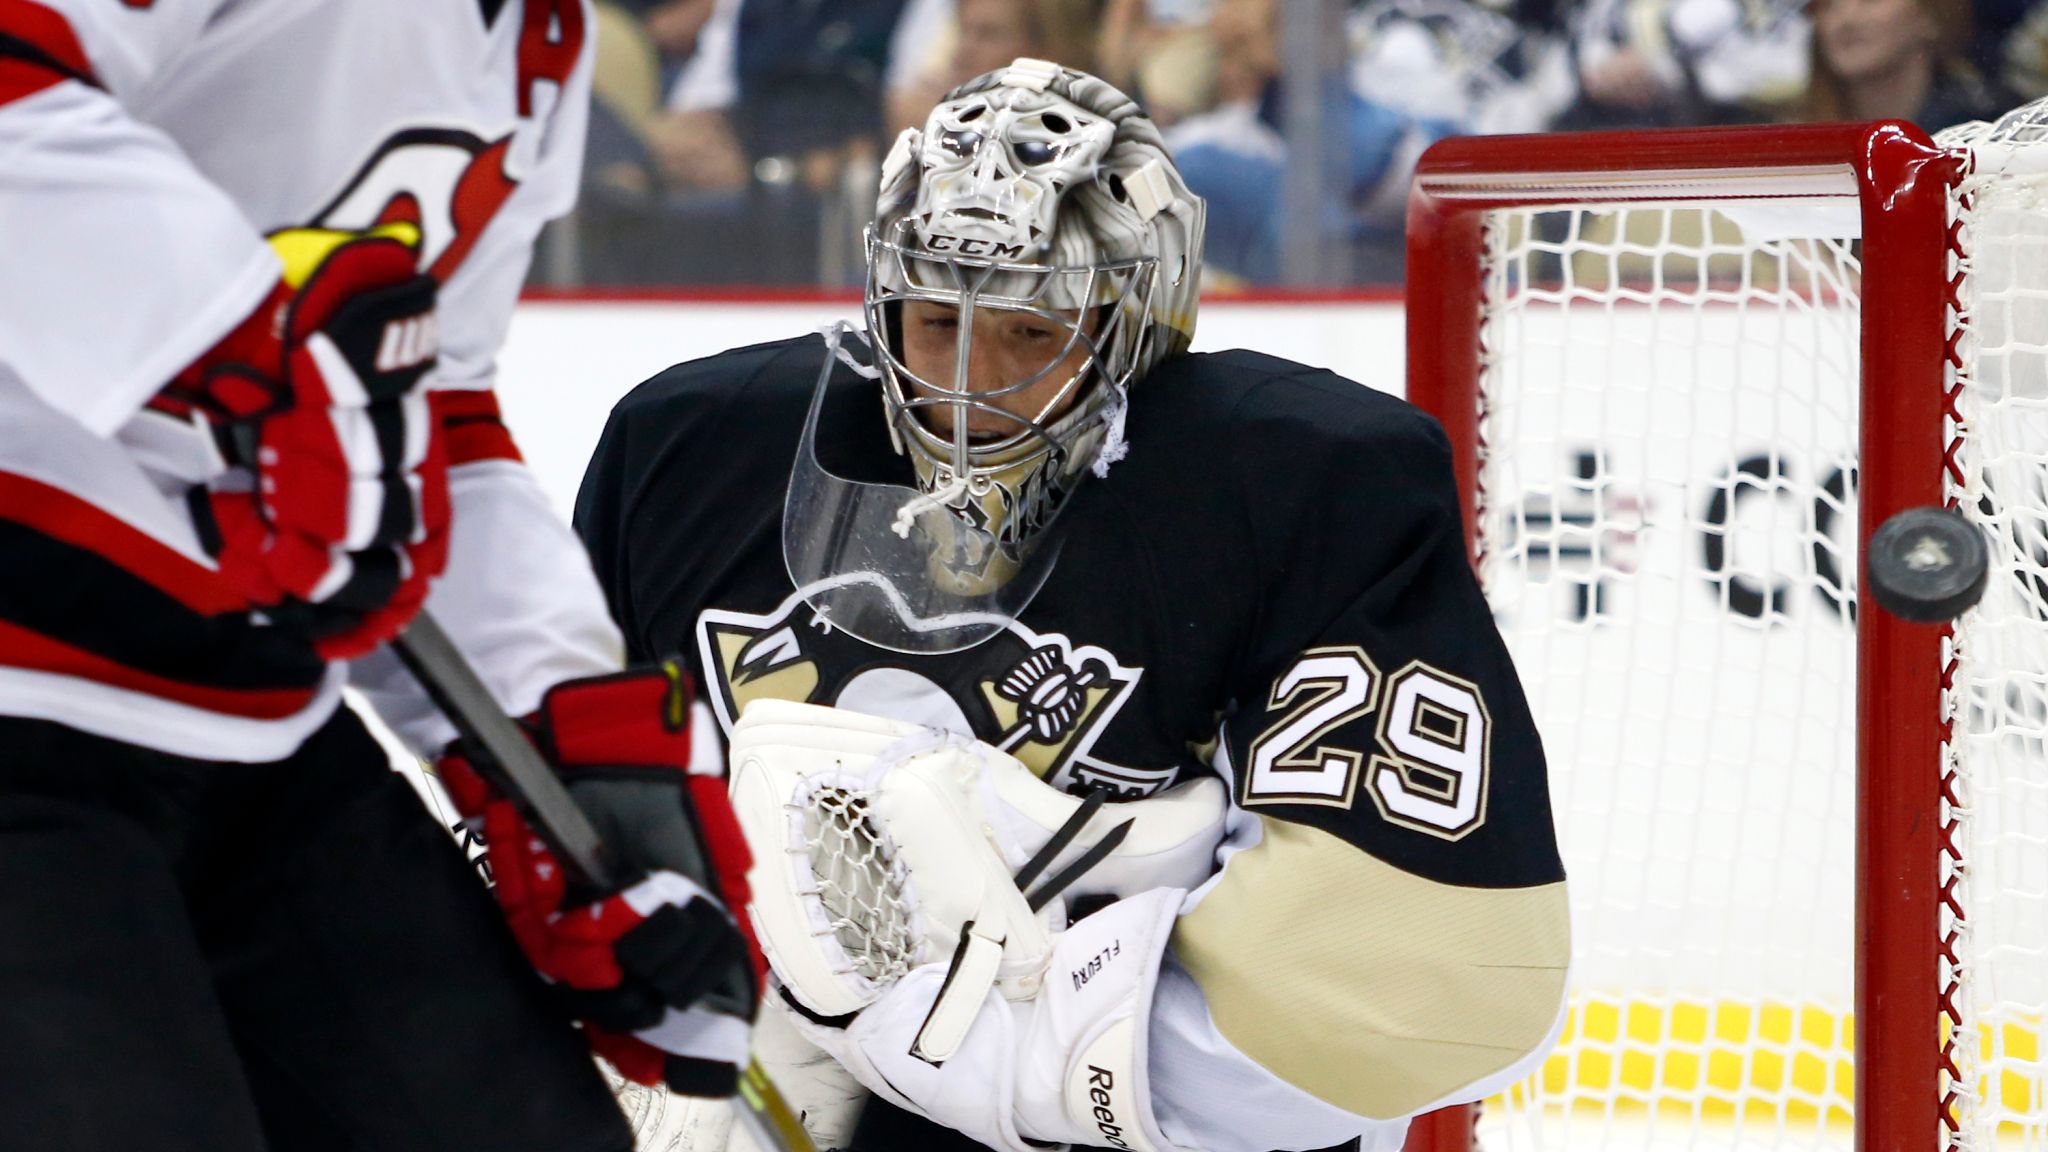 NHL Marc-Andre Fleury leads the Pittsburgh Penguins to victory Ice Hockey News Sky Sports